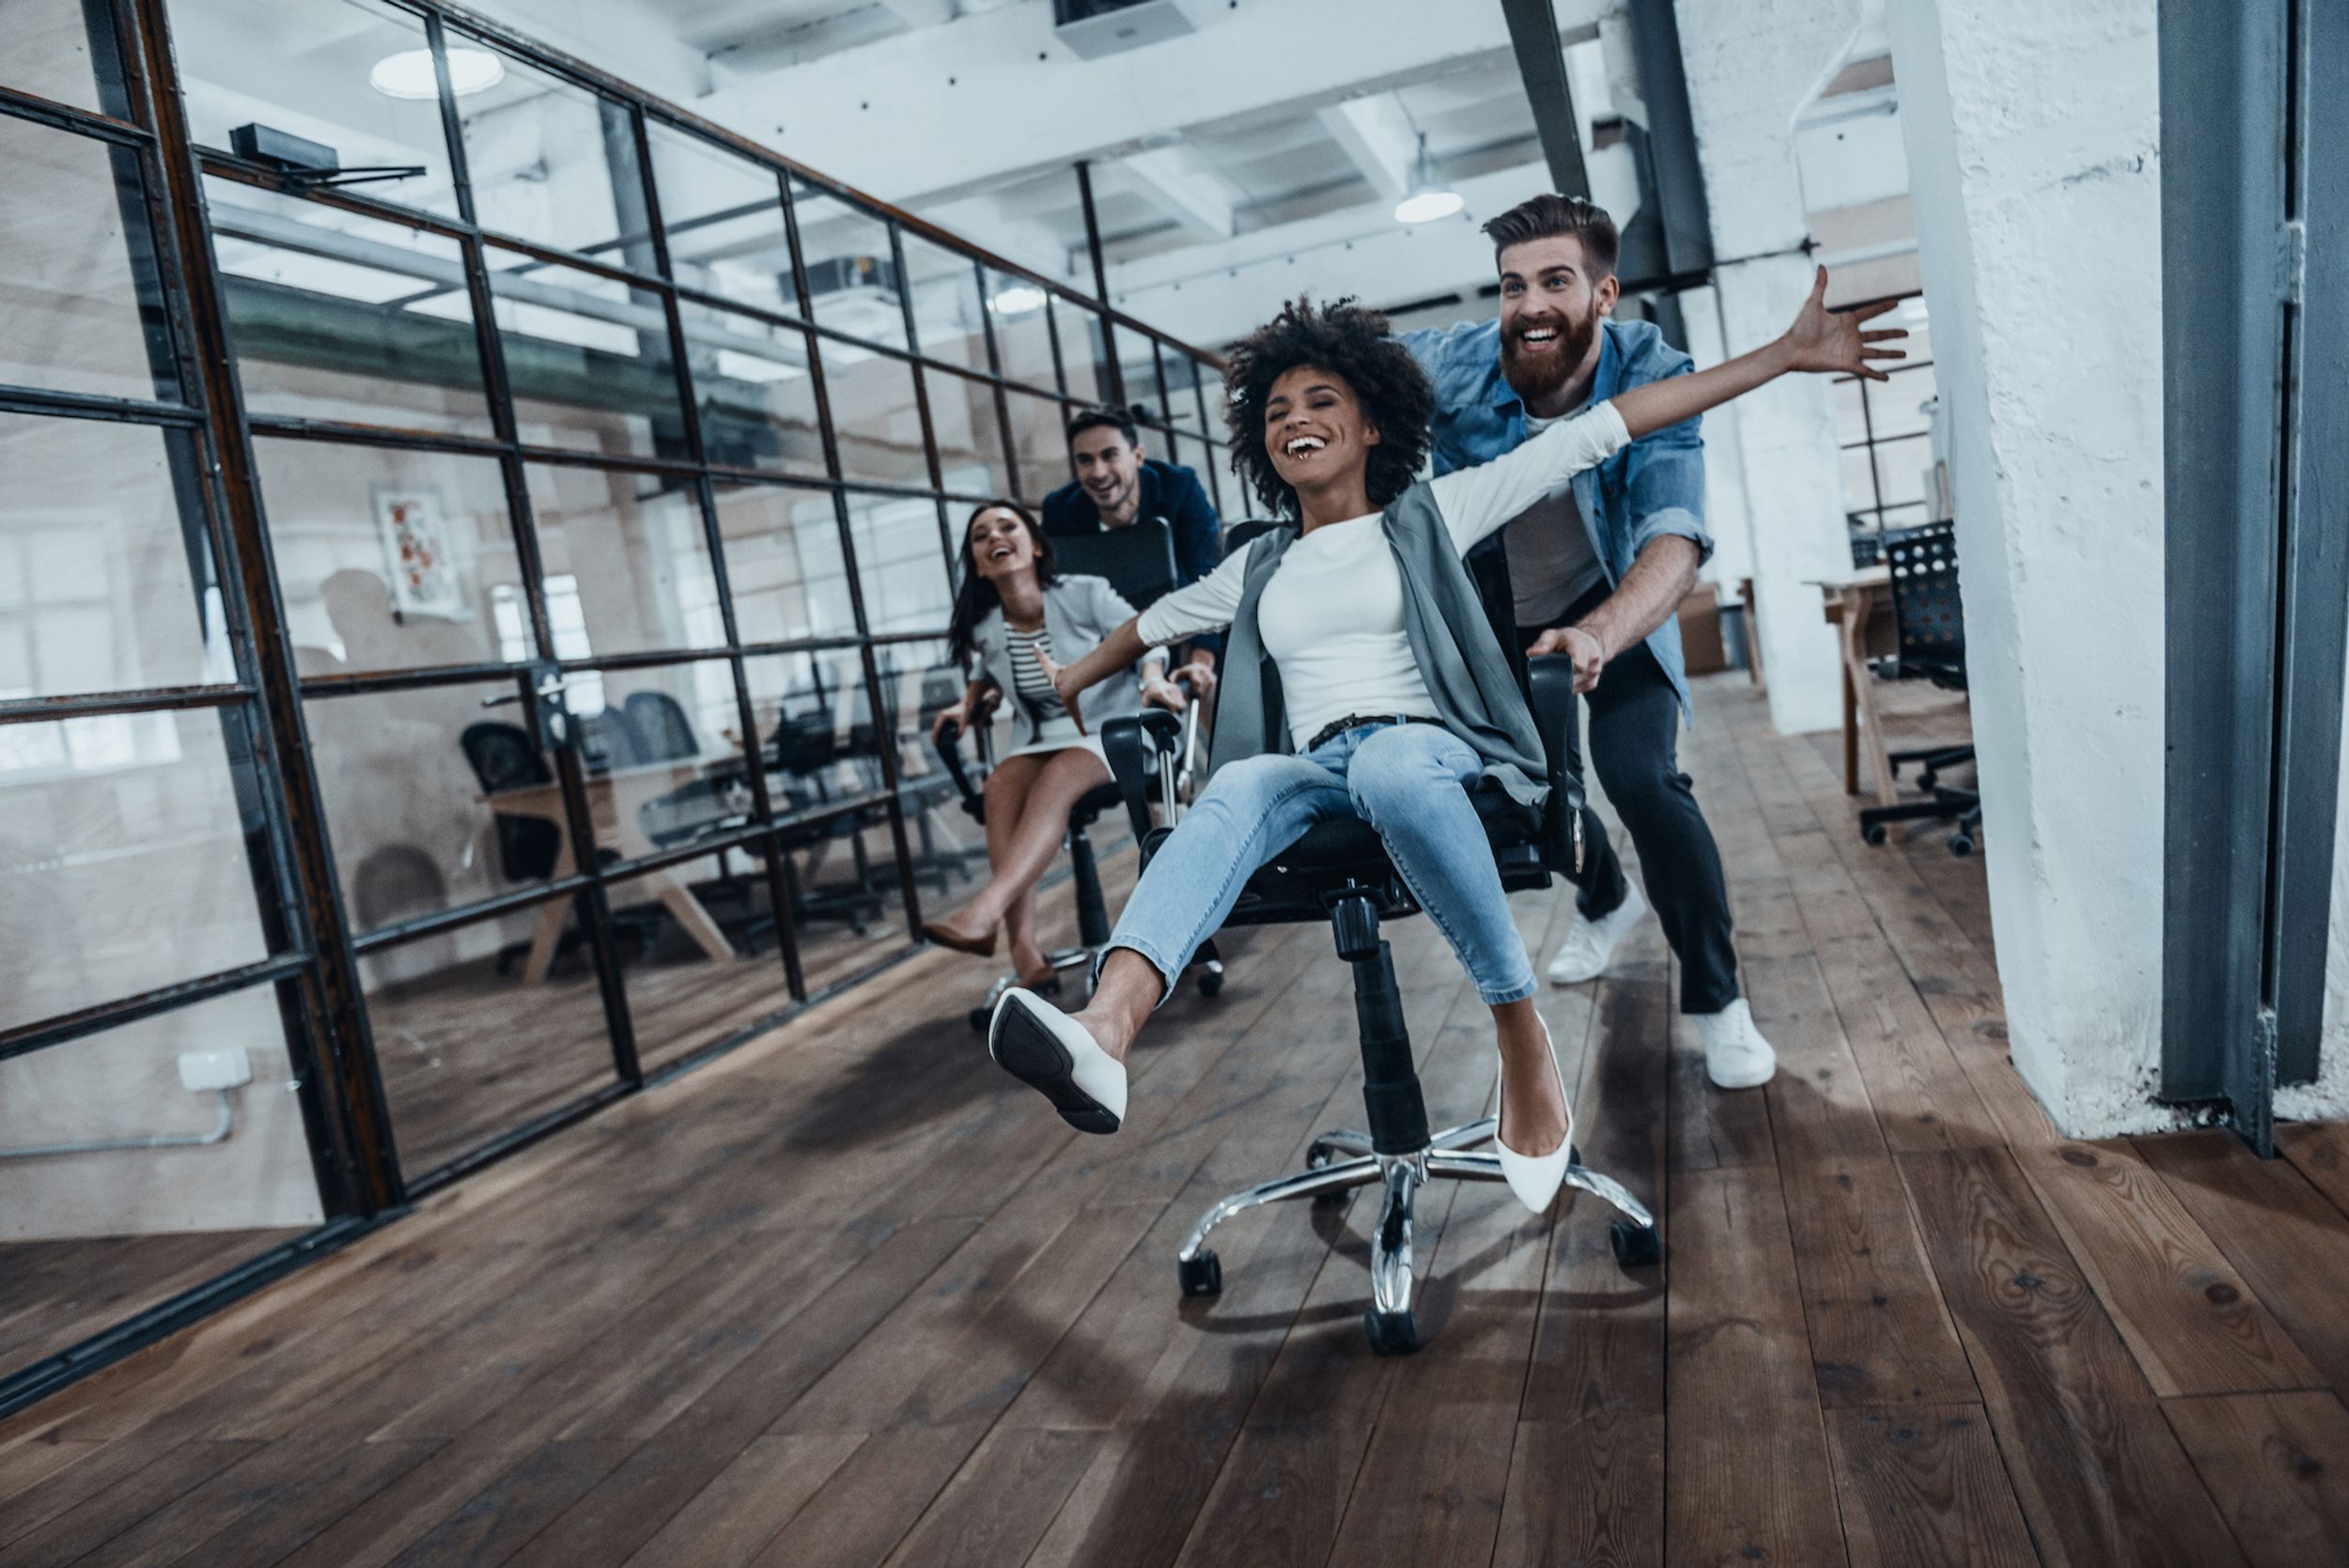 4 Fun Ways To Promote Cohesion Between Your Employees